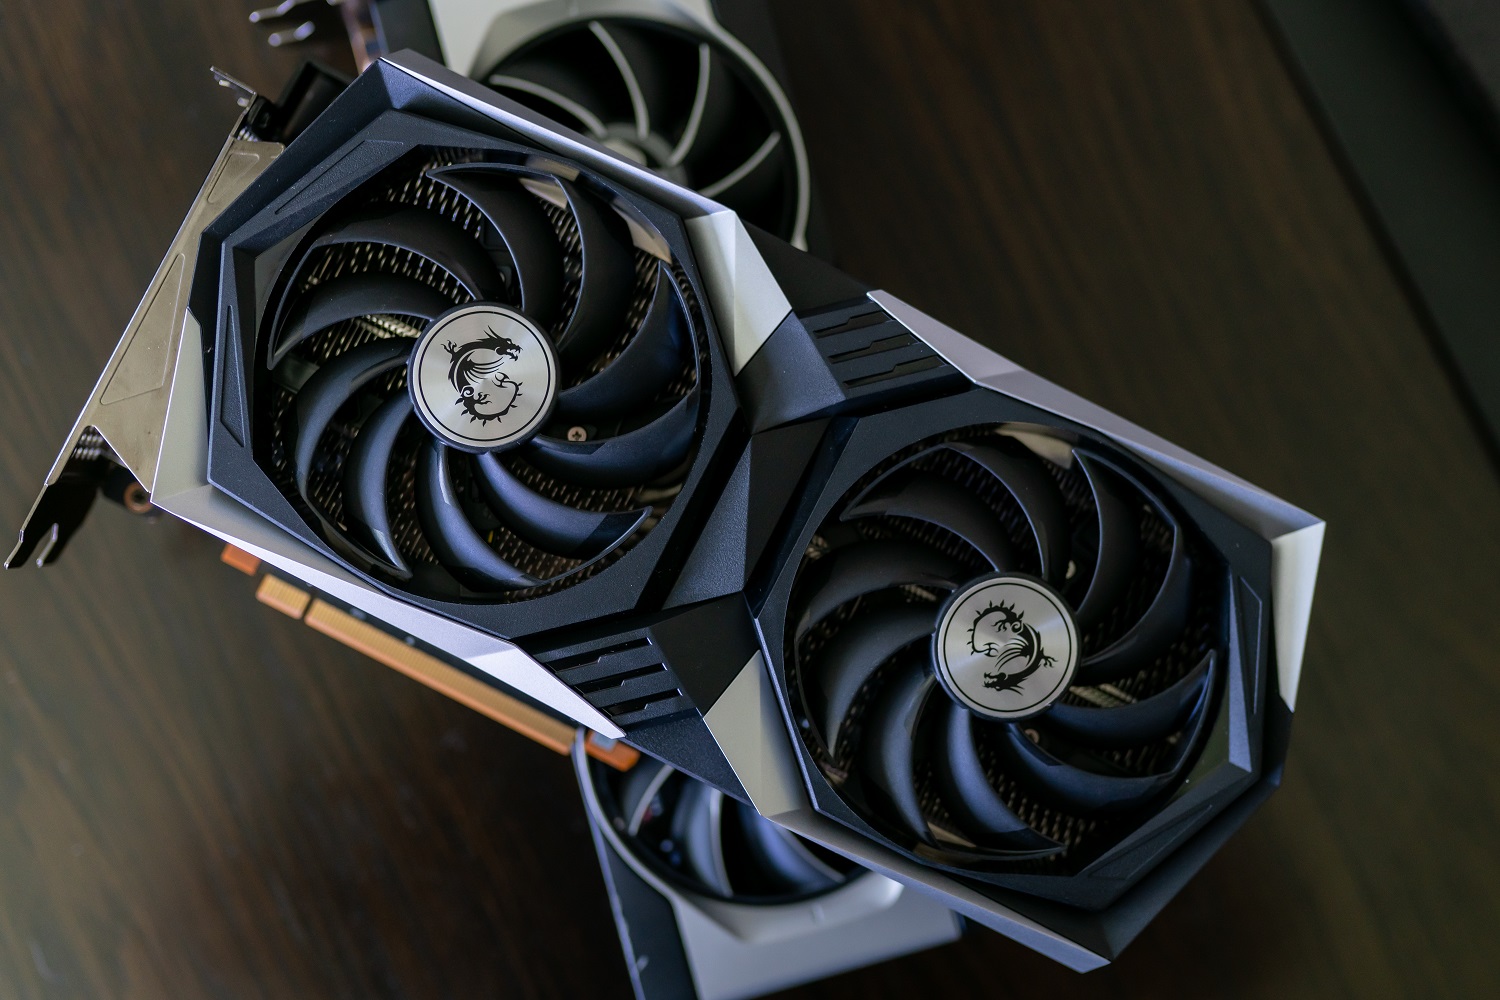 How to Benchmark Your Graphics Card Step-by-Step